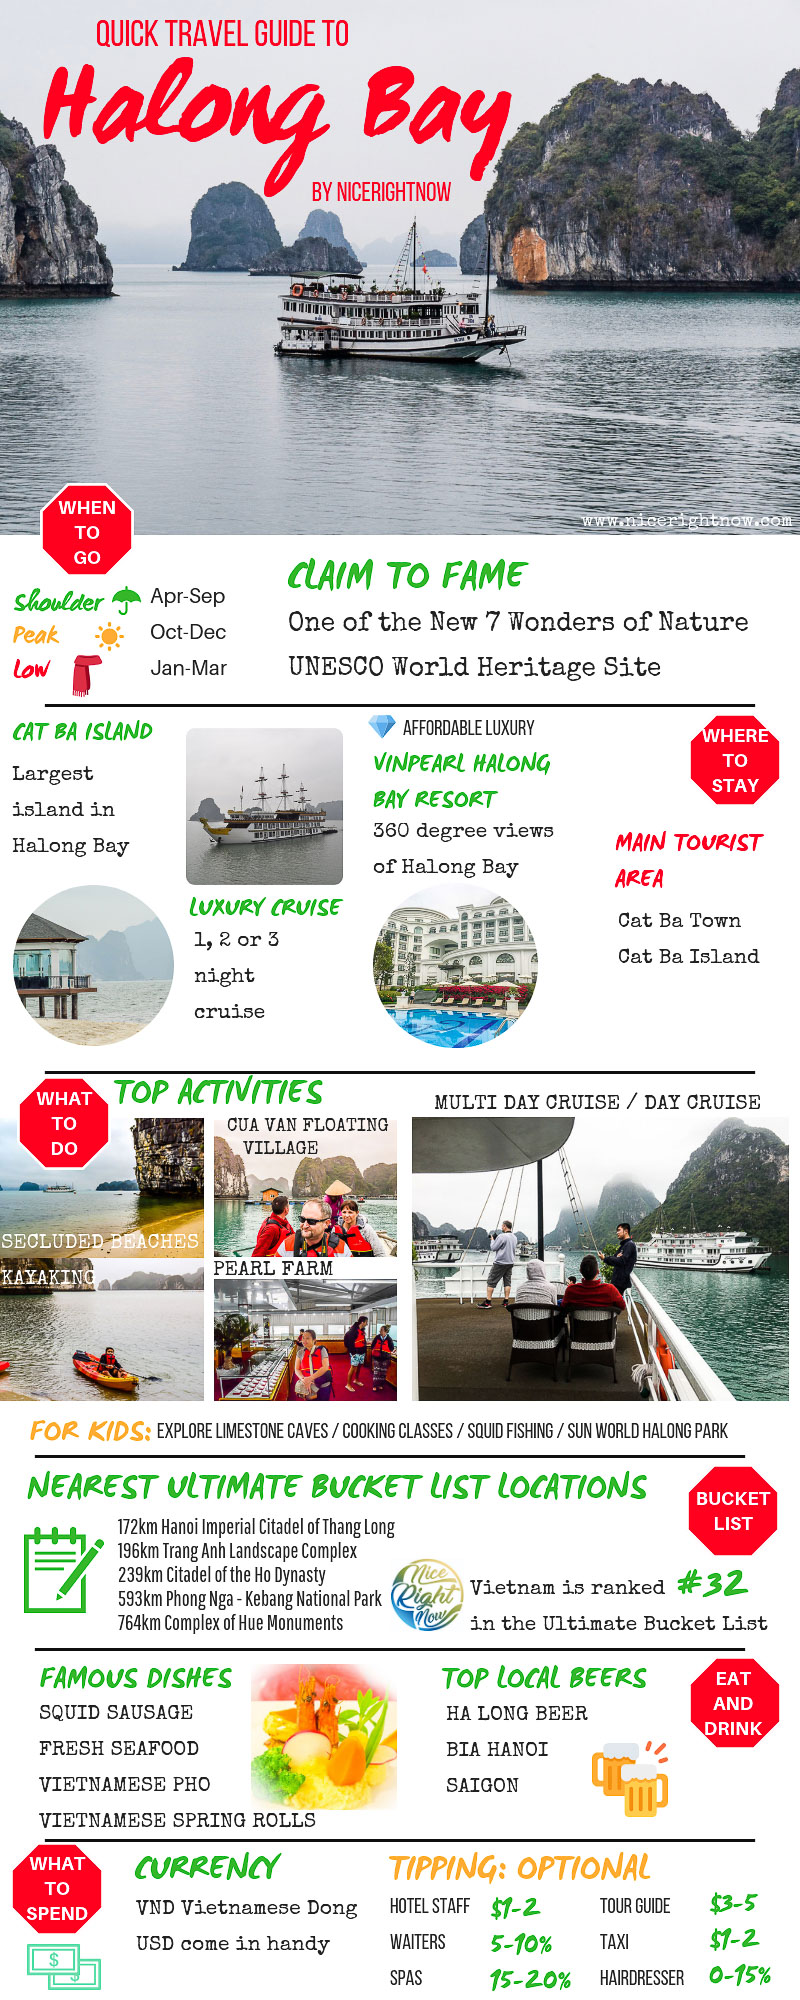 Quick Travel Guide to Halong Bay Infographic